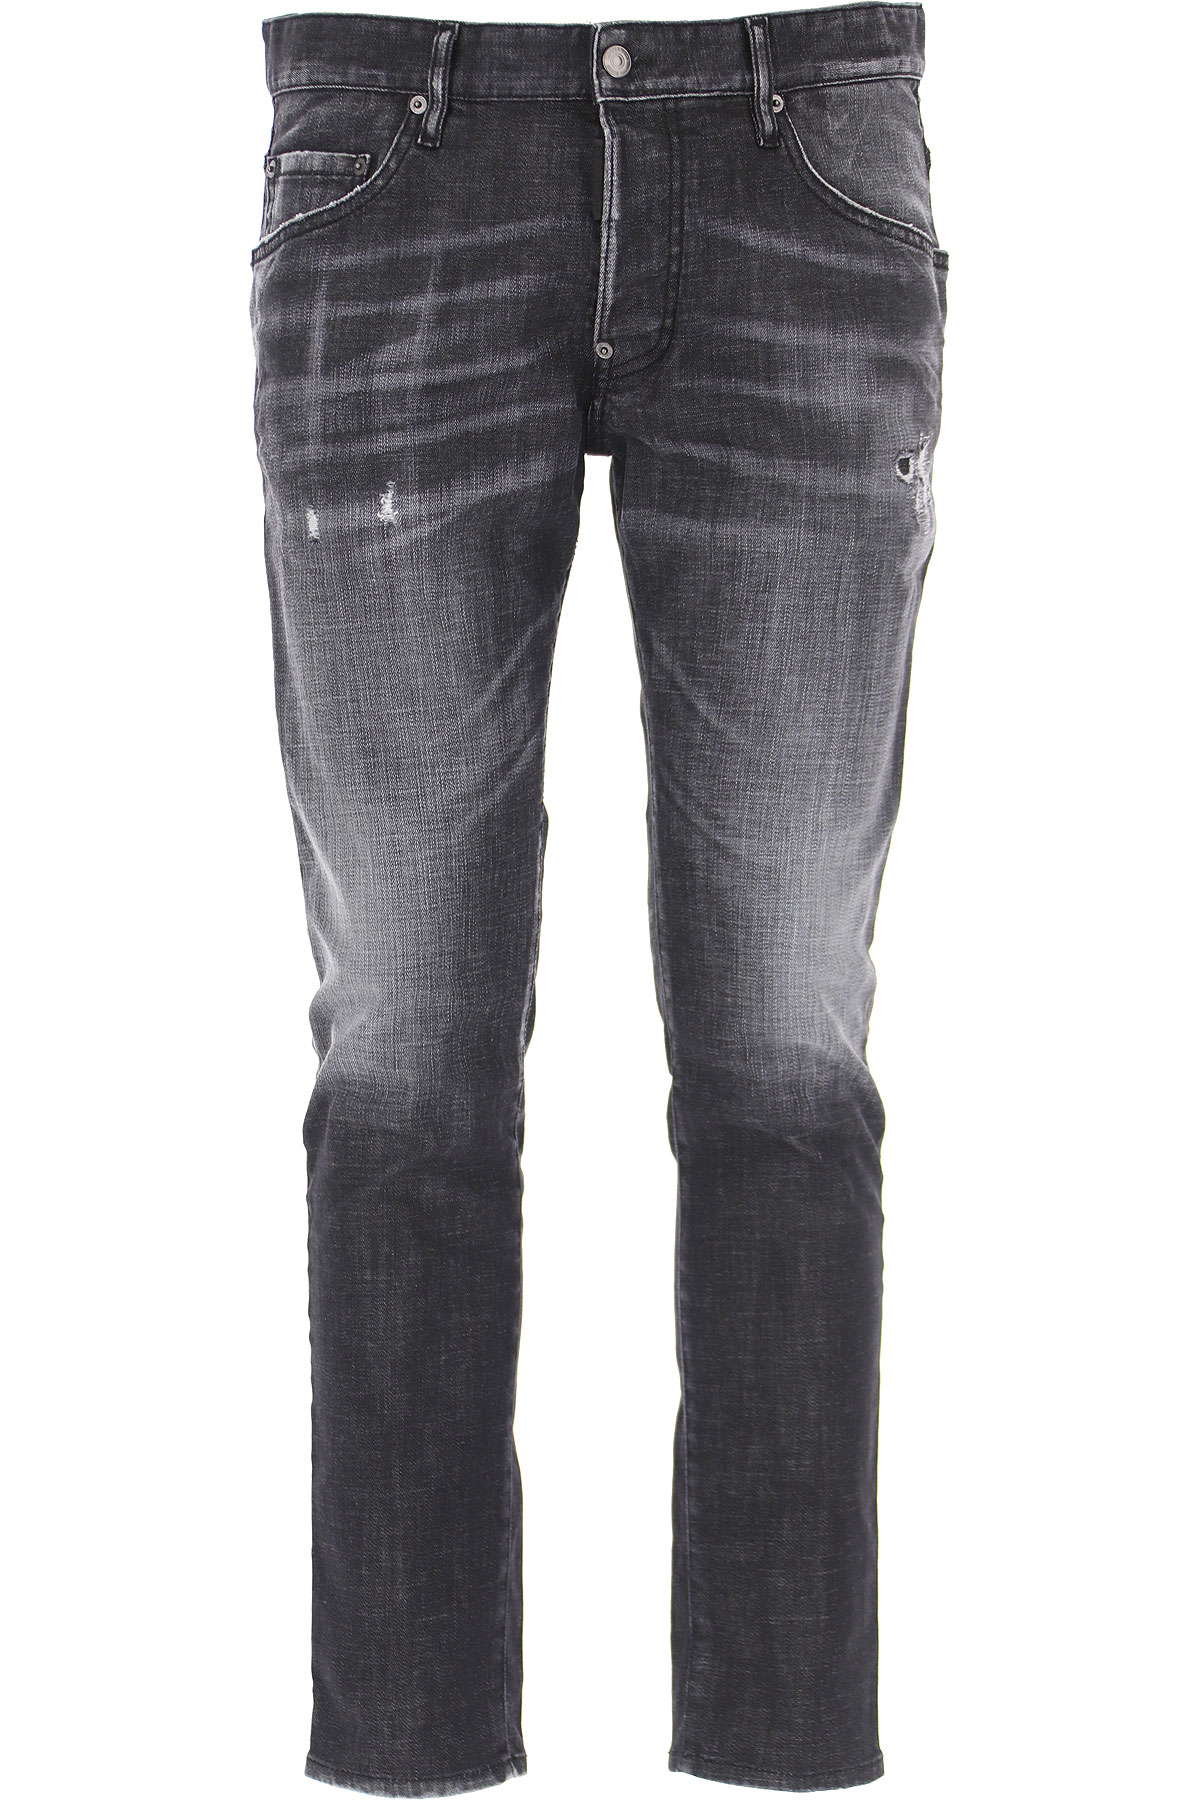 Mens Clothing Dsquared2, Style code: s74lb0880-s30357-900